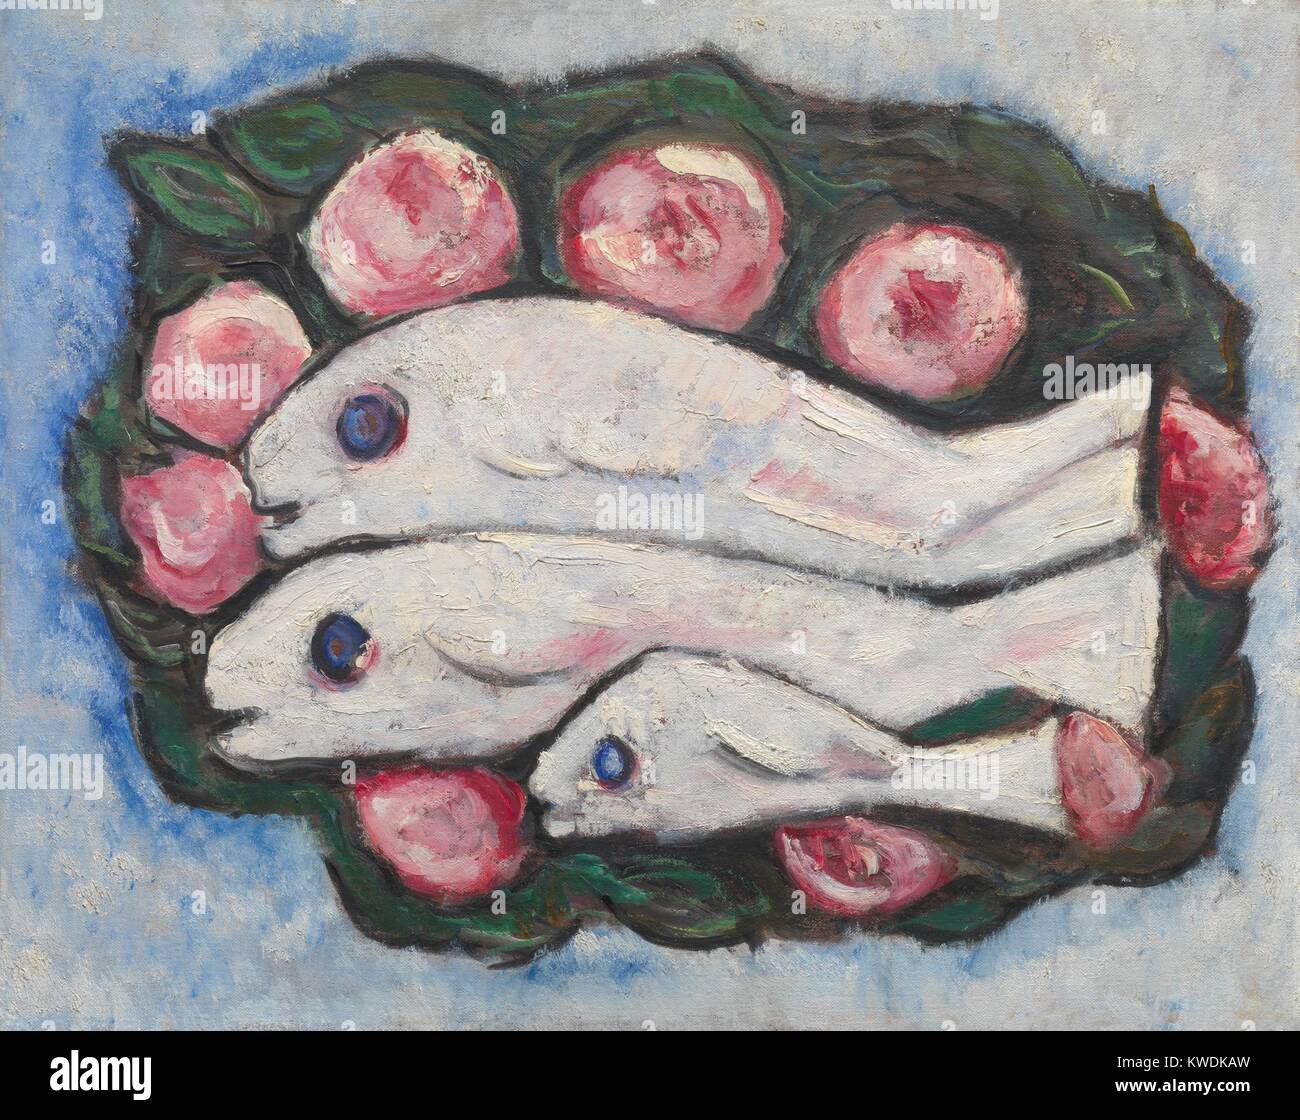 BANQUET IN SILENCE, by Marsden Hartley, 1935-36, American painting, oil on canvas. Still life of a plate of fish painted in a Hartleys personal synthesis of Cubism and German Expressionism (BSLOC_2017_7_110) Stock Photo